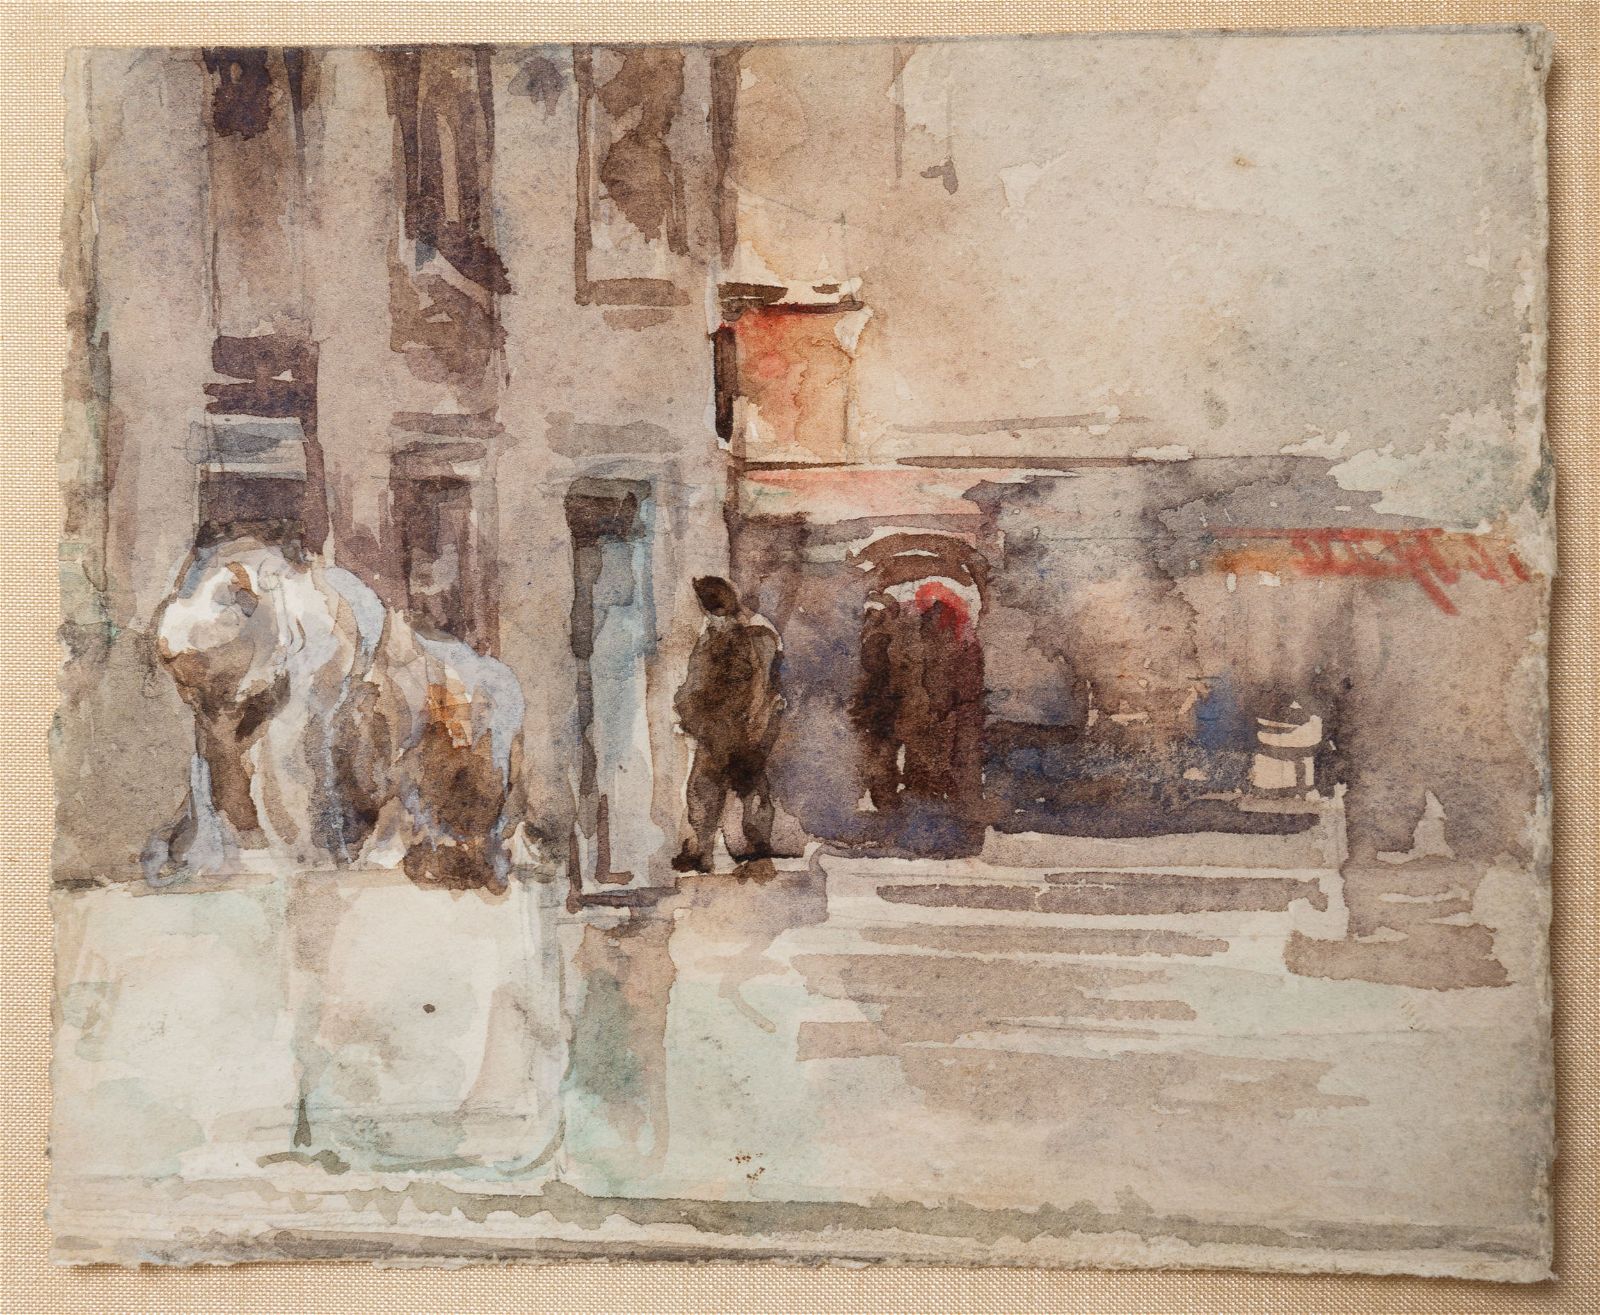 Watercolor of a Venetian scene attributed to John Singer Sargent, which hammered for $7,750 and sold for $9,687 with buyer’s premium at Amelia Jeffers.